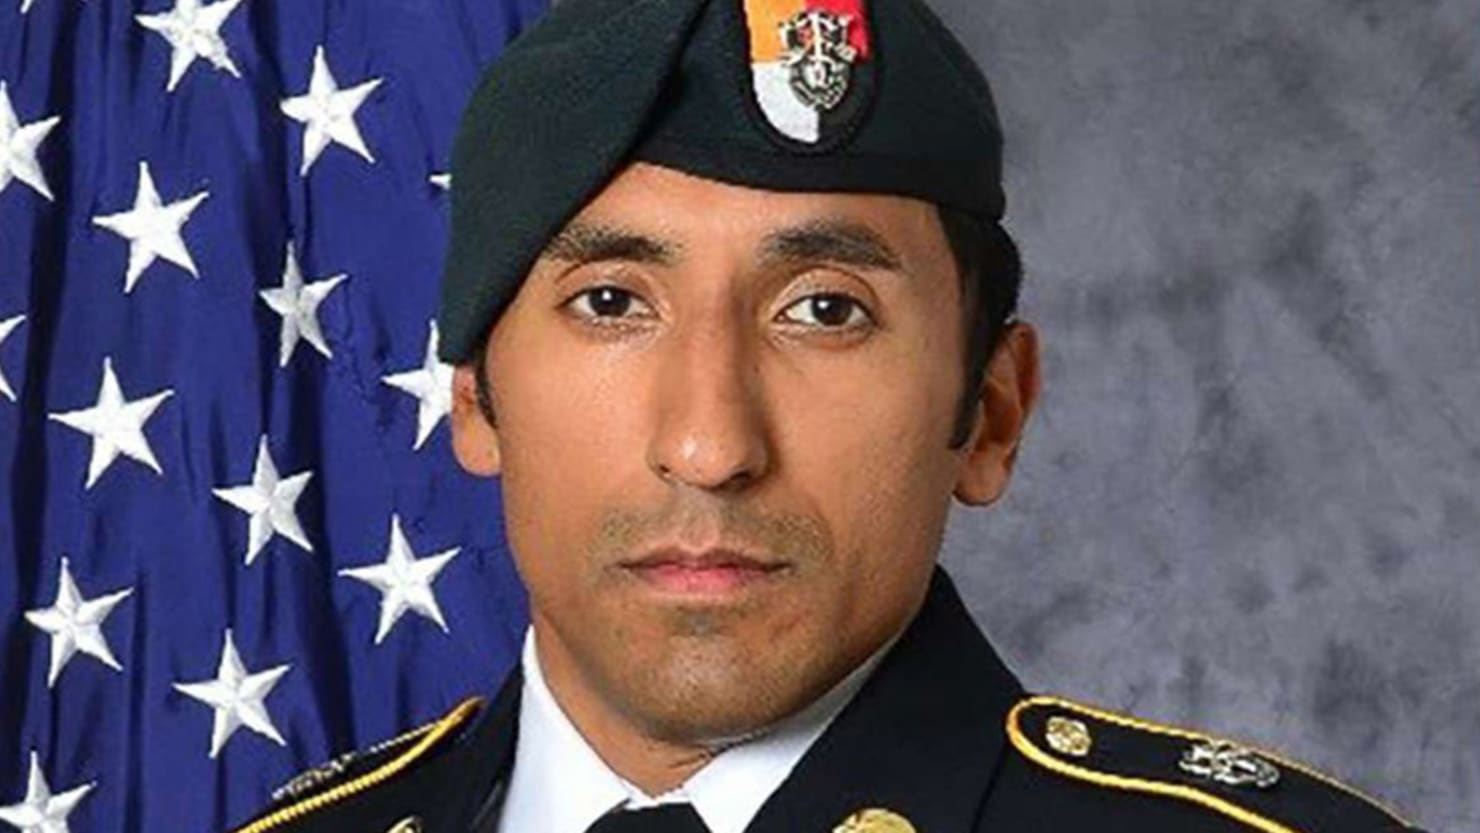 Tony DeDolph, Navy SEAL, who suffocated green beret to death, sentenced to 10 years